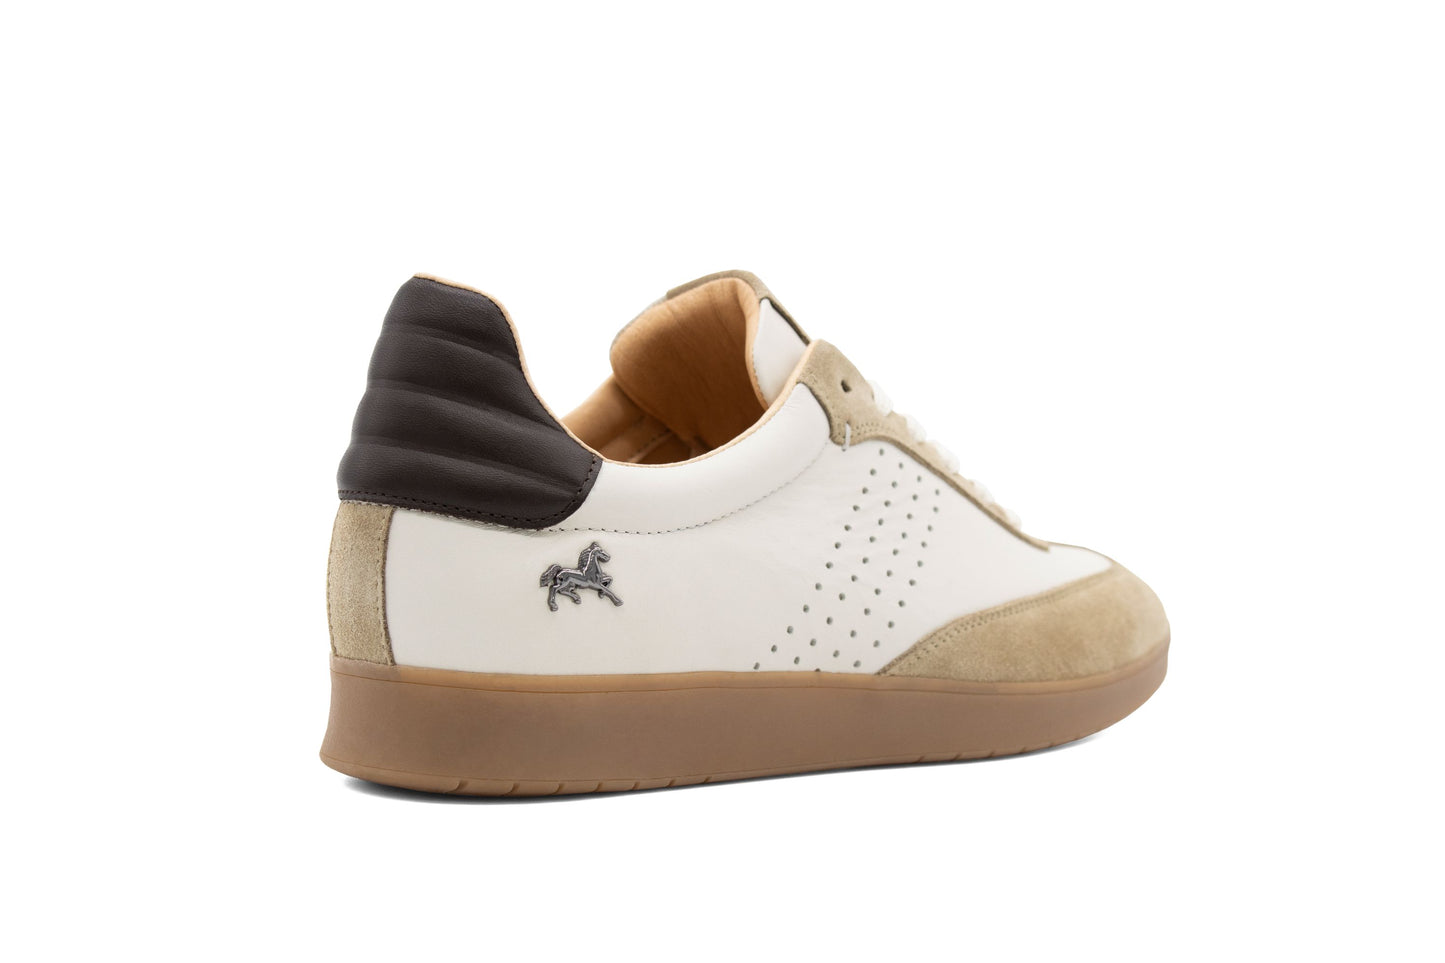 Cavalinho Cheval Sneakers - Sizes 10, 12, 13 - Beige - 48060012.31_3_68d3a83a-93a2-4be1-9a56-687438ac8d85